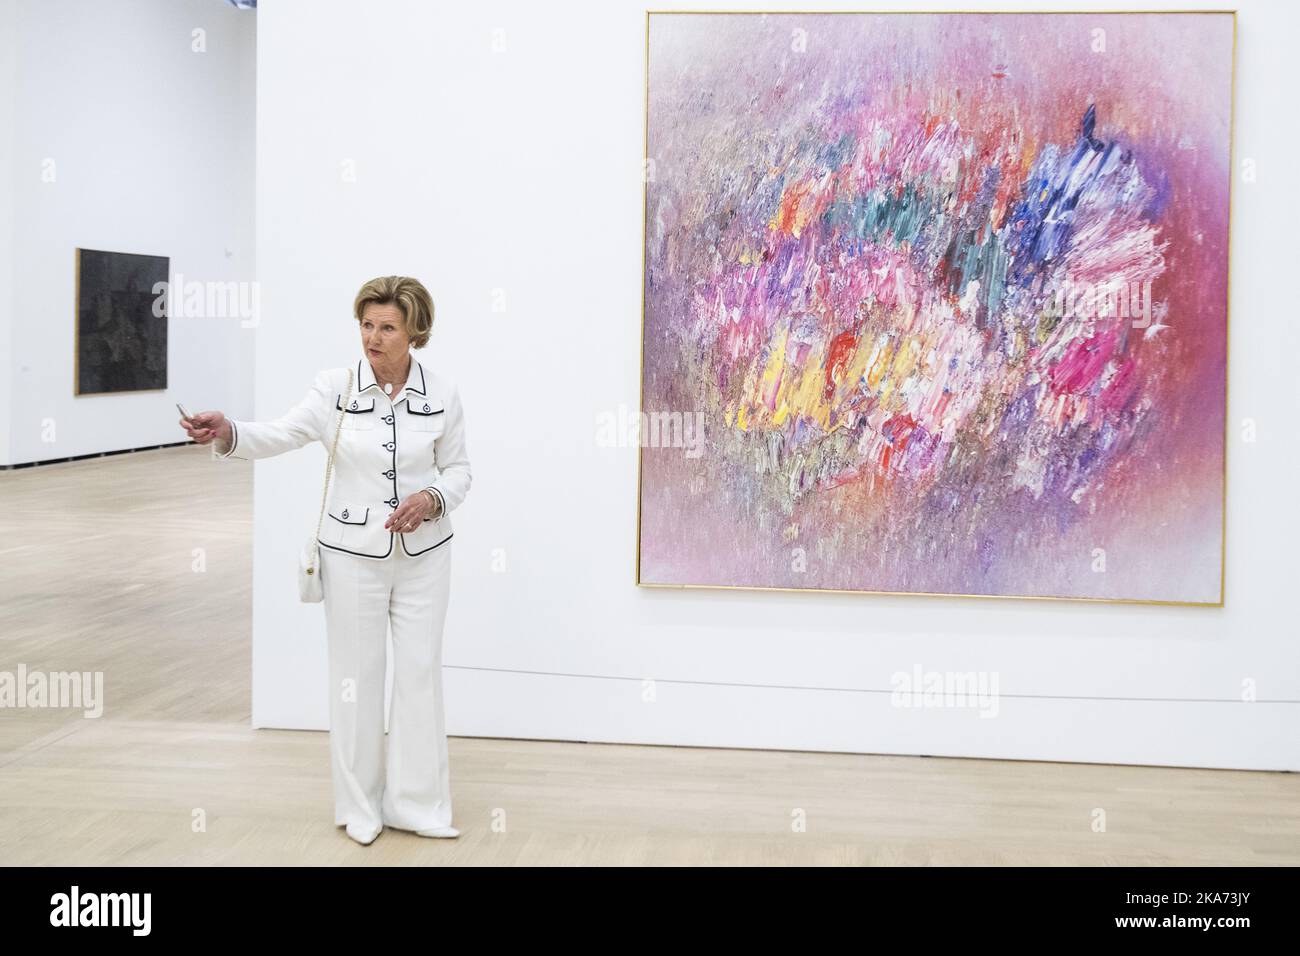 HOVIK, NORWAY 20180615. Queen Sonja is present during the opening of the Jakob Weidemann exhibition at Henie Onstad Art Center at Hovik. Here at the artwork 'Markblomst' from 1982. Photo: Haakon Mosvold Larsen / NTB scanpi Stock Photo